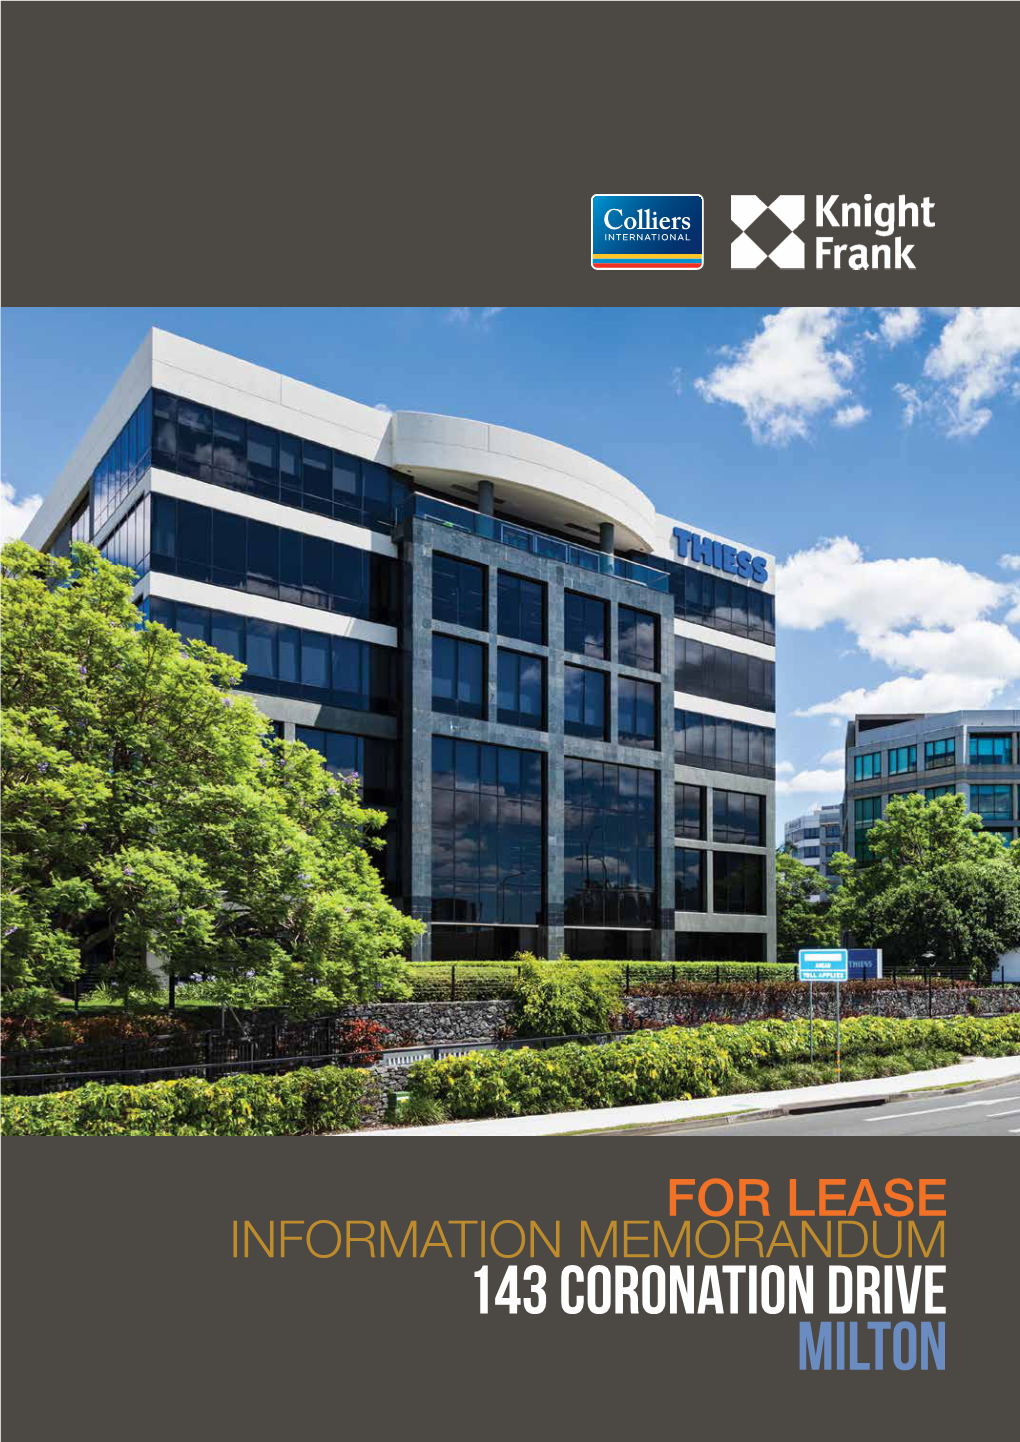 143 Coronation Drive Milton Introduction Knight Frank and Colliers Are Extremely Proud to Present 143 Coronation Drive, Available for Sub-Lease Or Direct Lease